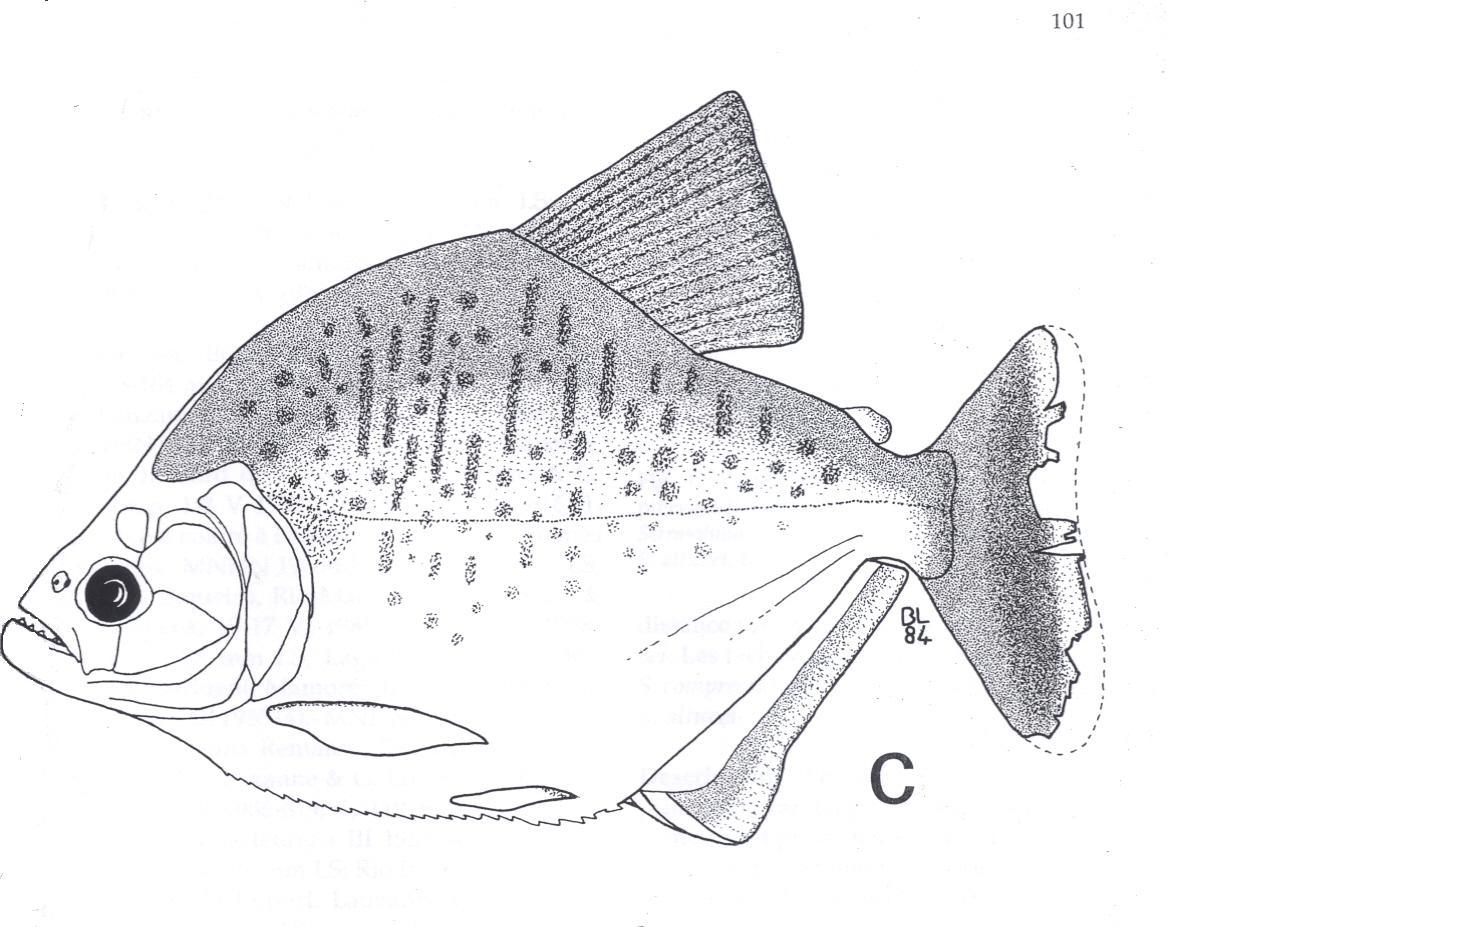 S. altuvei, misidentified by Jegu. Correct image name is S. hastatus, new species.